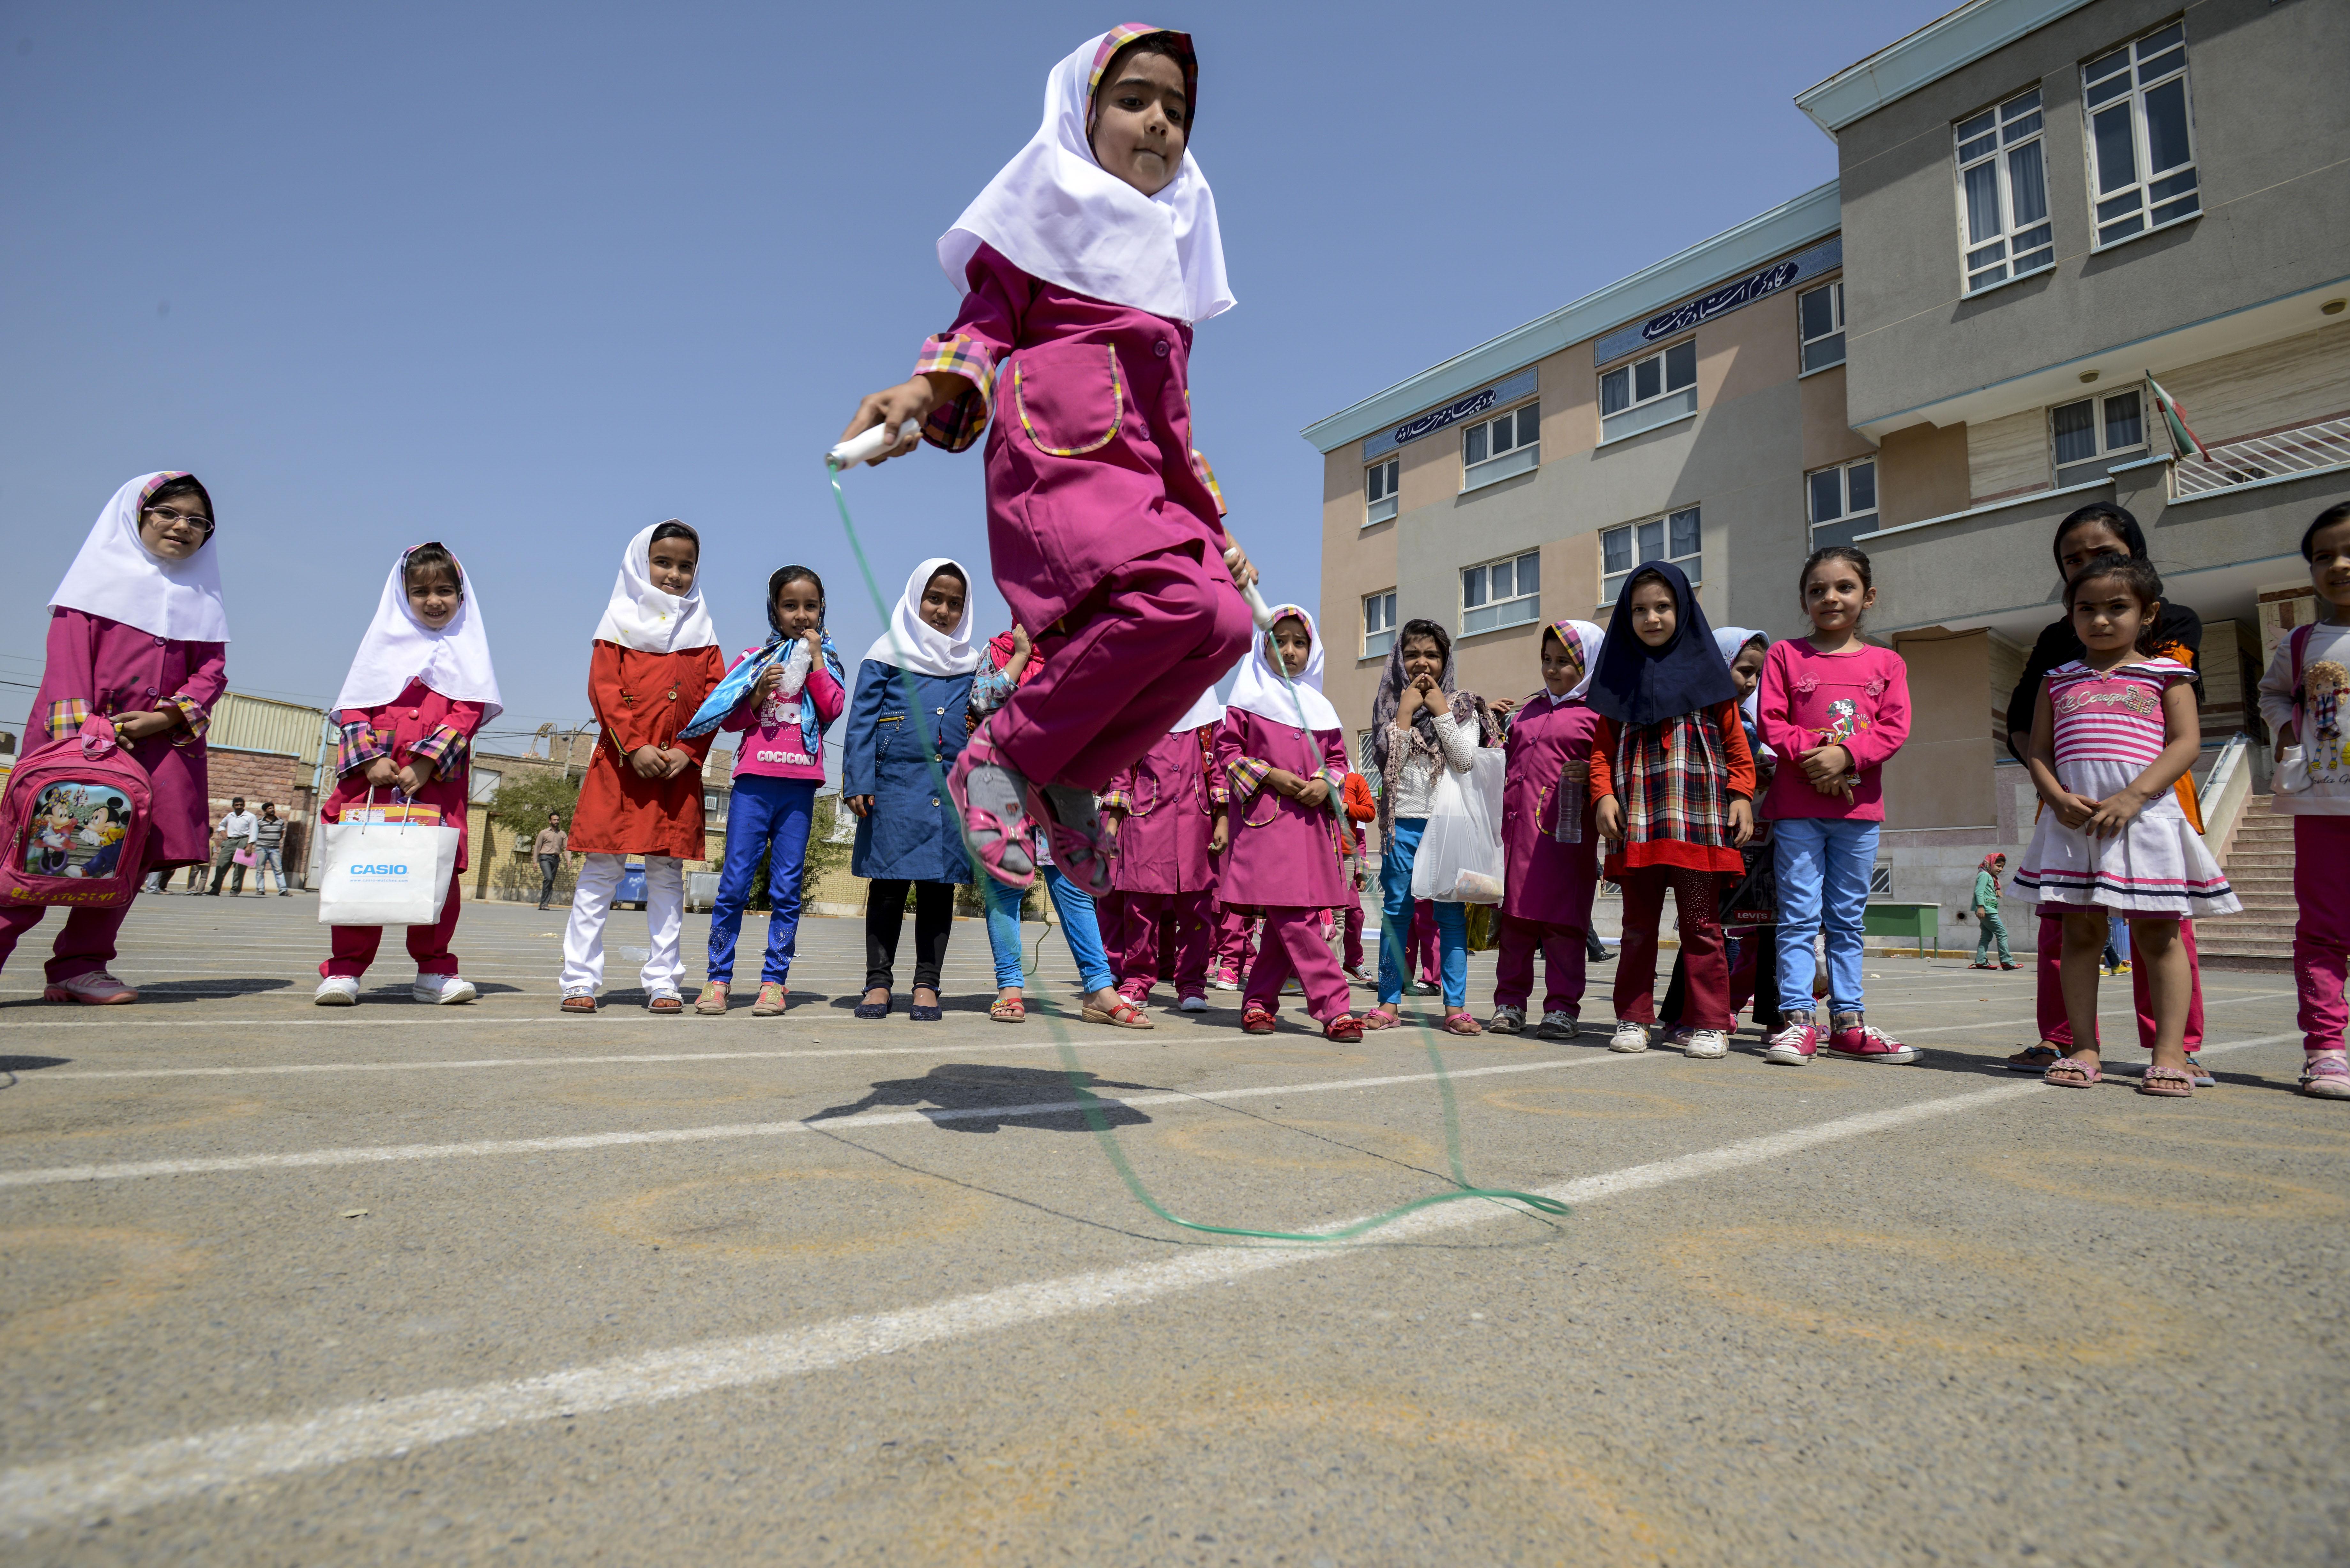 A girl jumps high over a skipping rope while others watch around. 